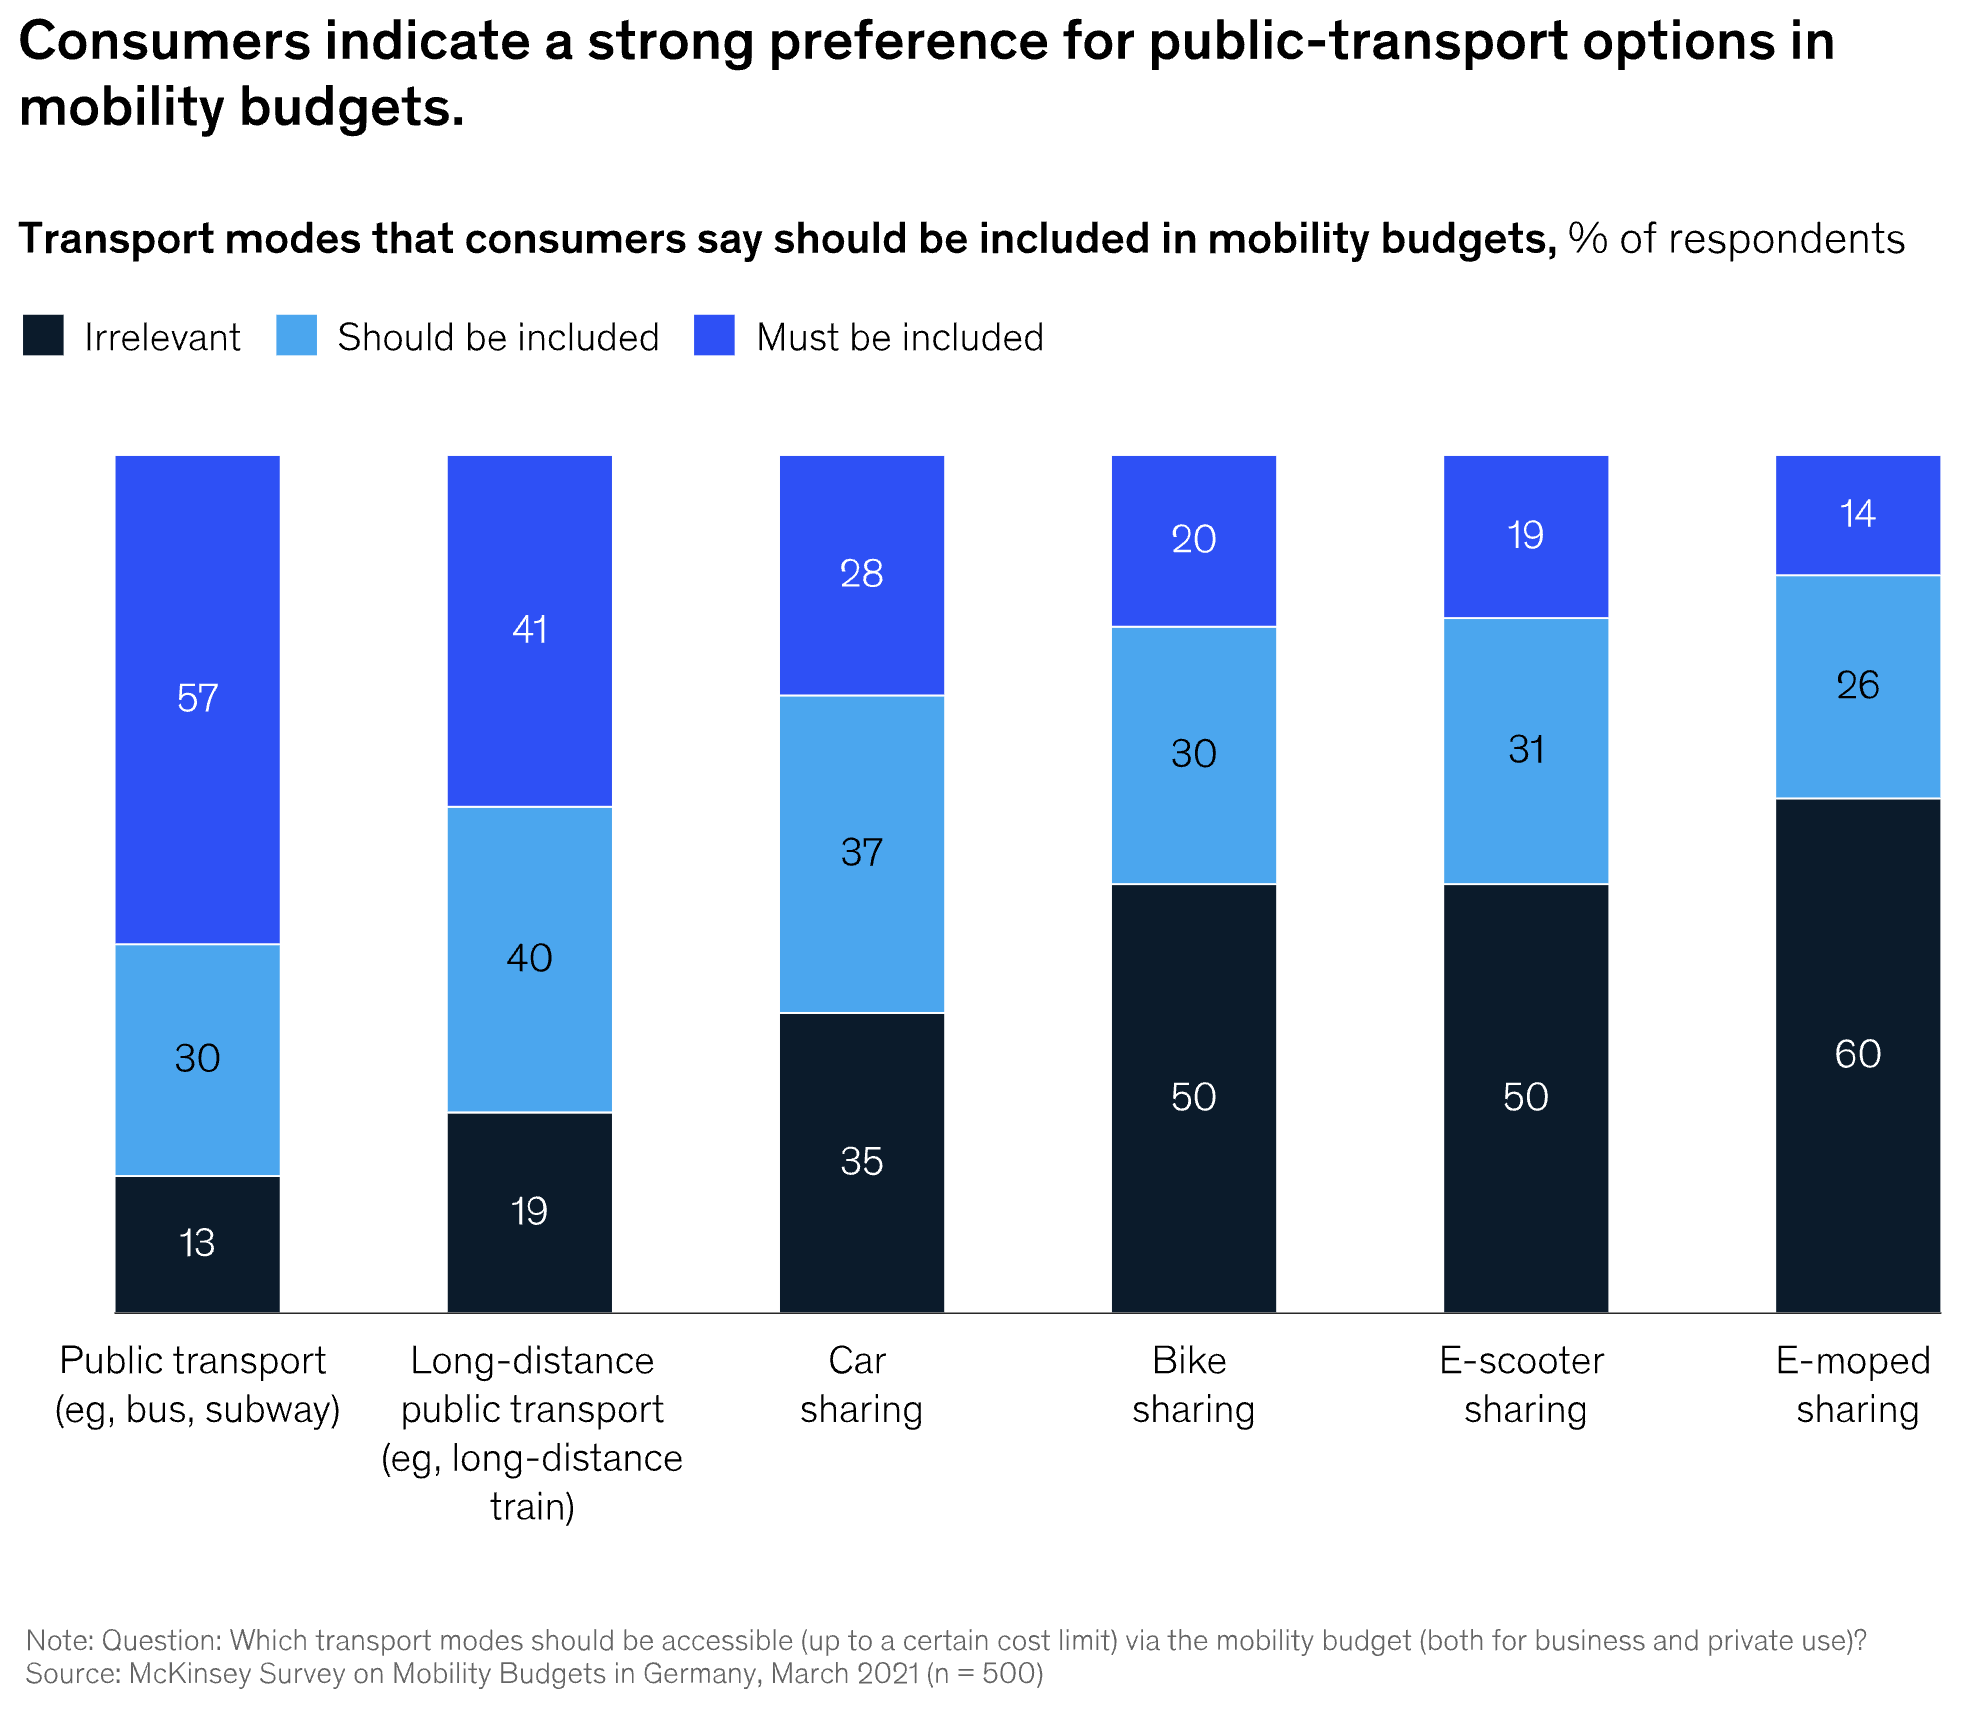 Consumers indicate a strong preference for public-transport options in mobility budgets